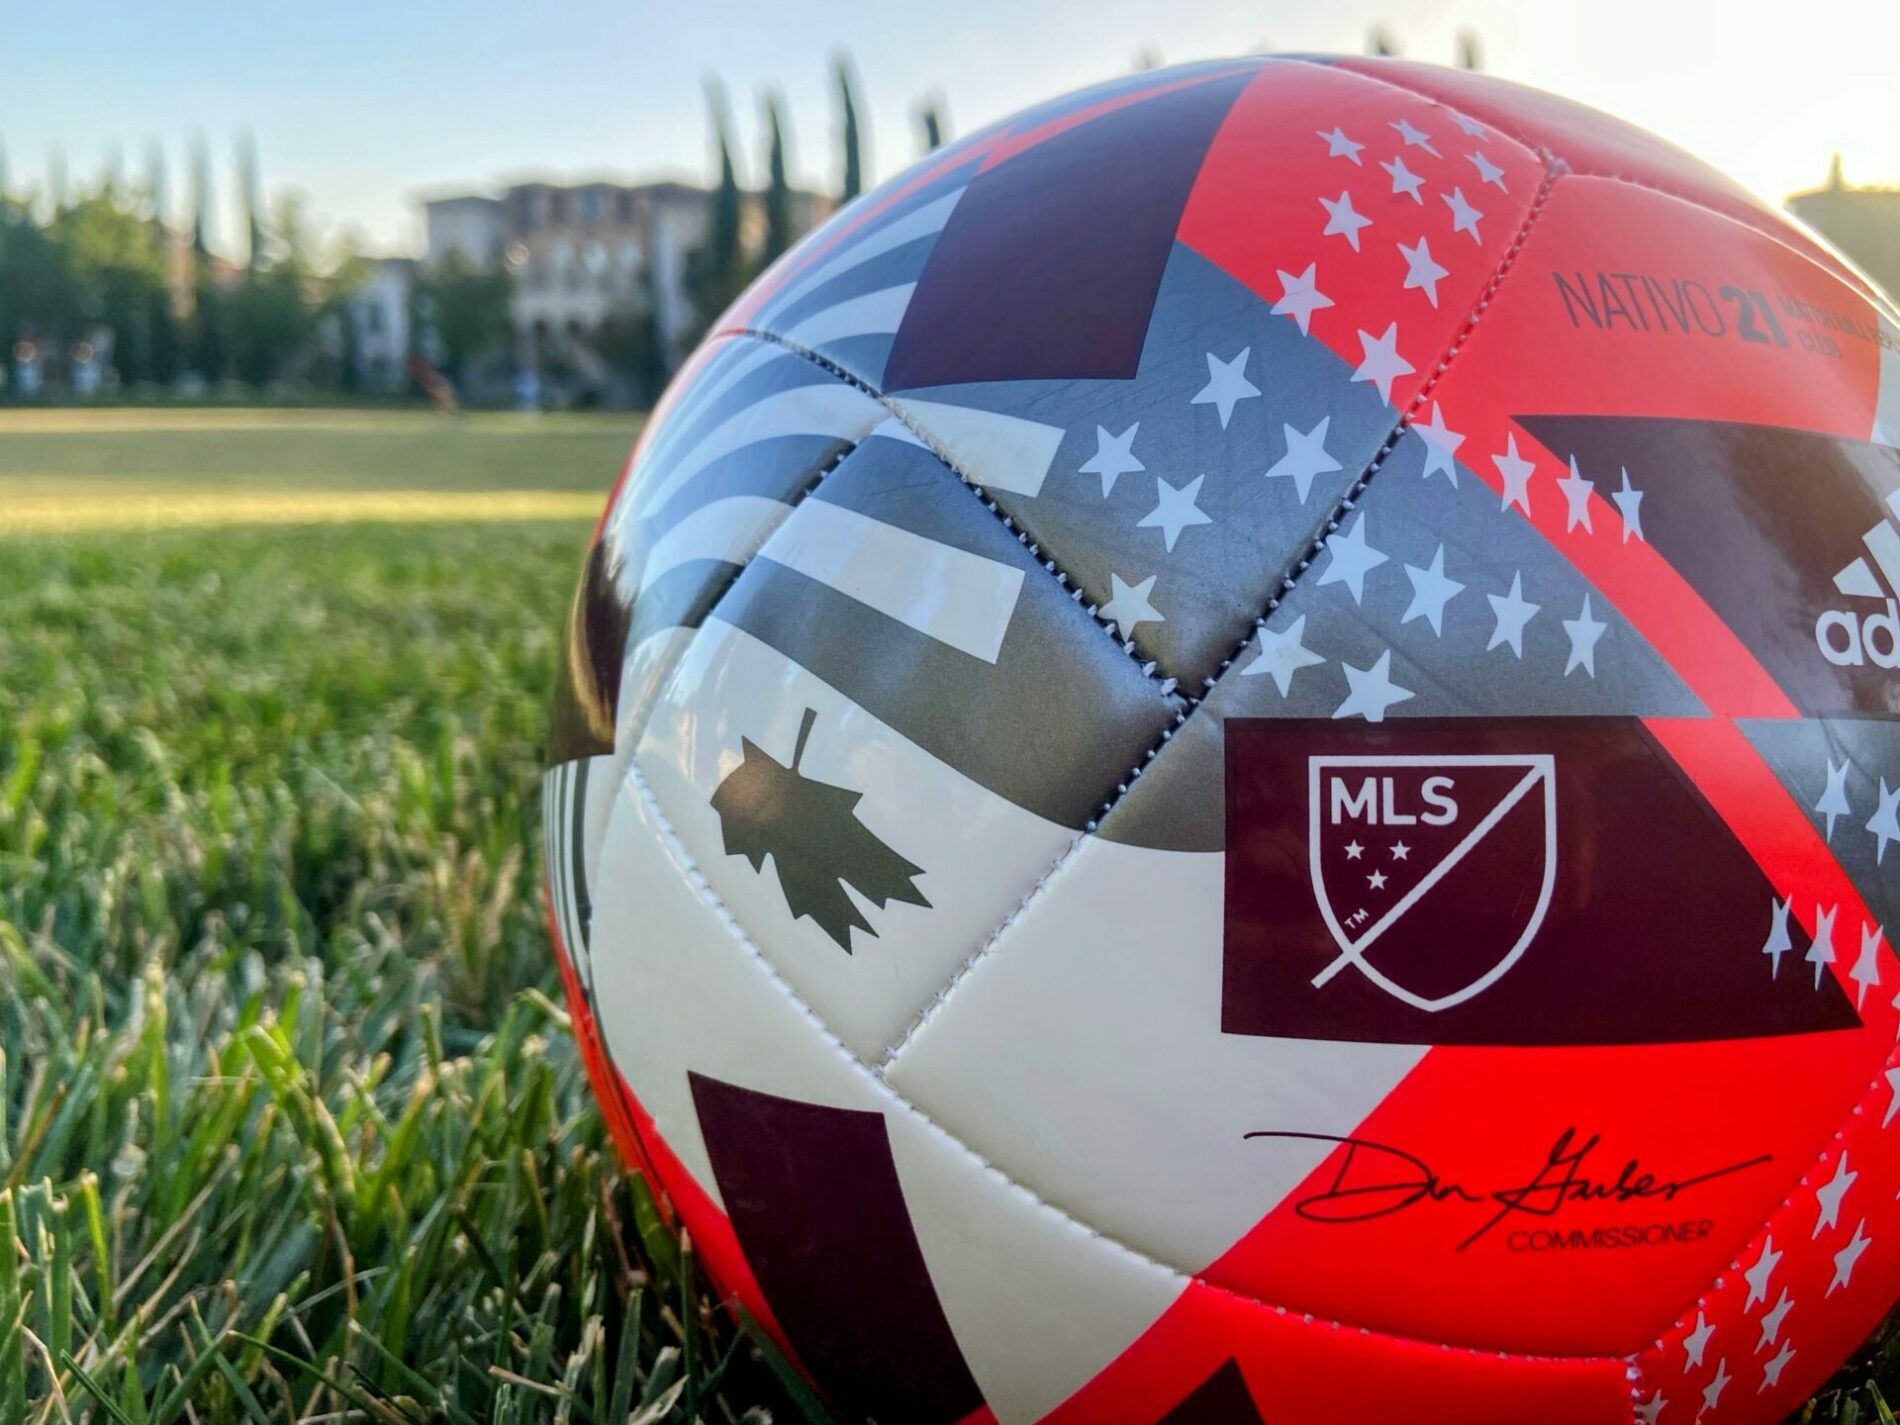 MLS’ Opening Weekend: Apple, a New Look and More